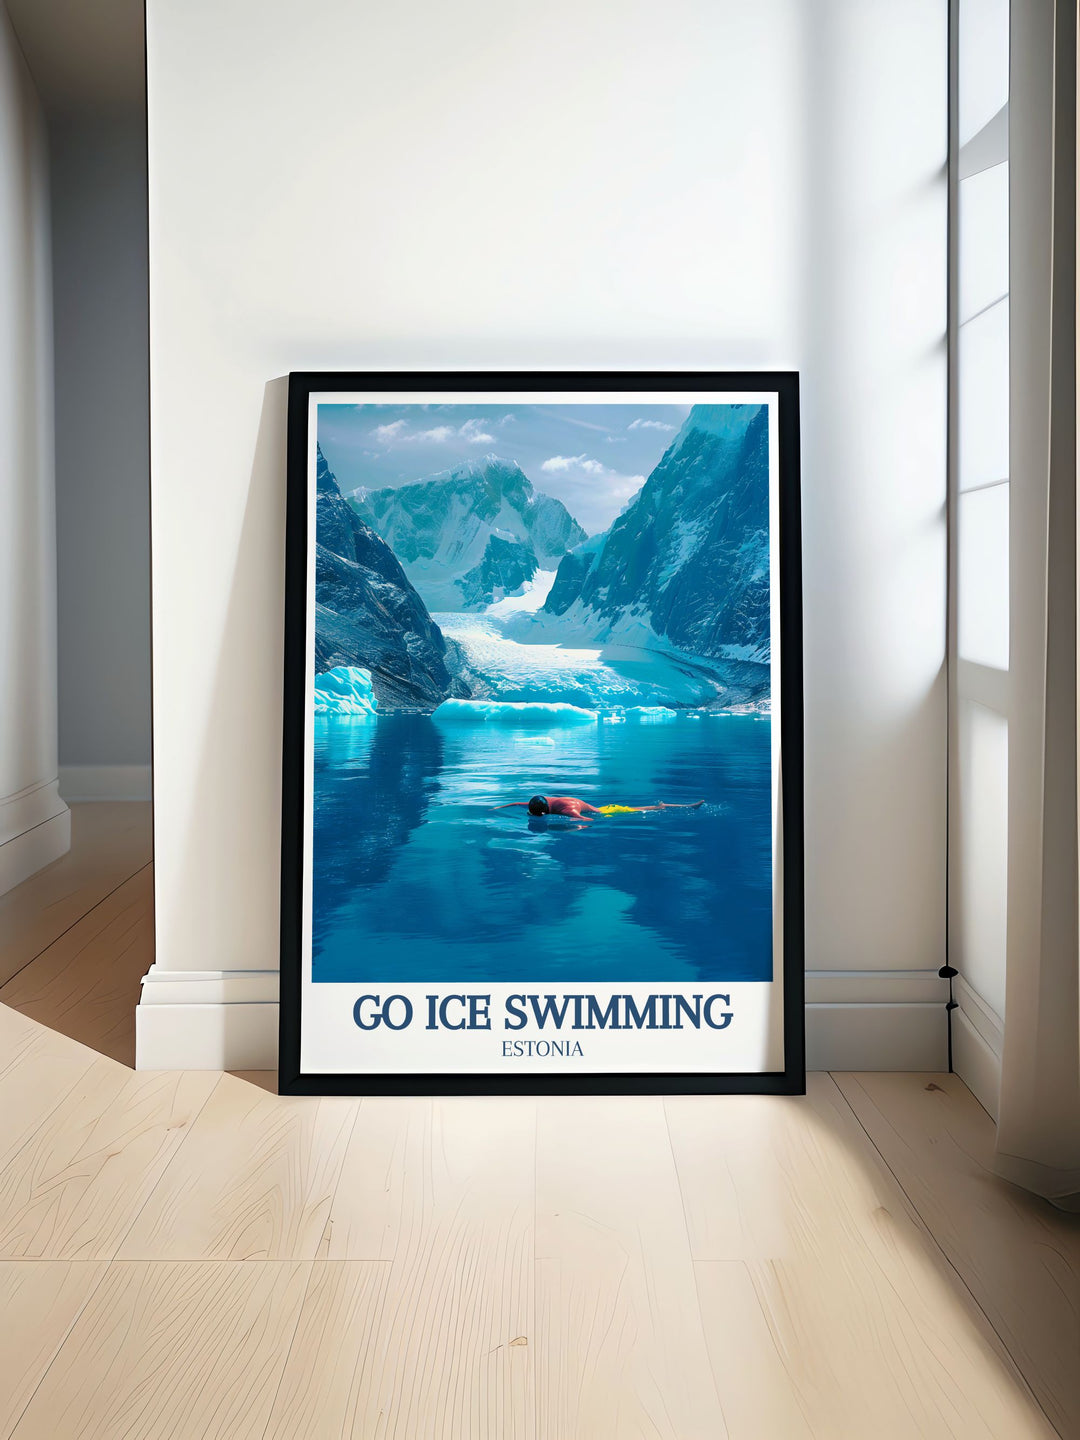 Vintage poster illustrating the grandeur of the Ross Ice Shelf, celebrating the timeless beauty and adventure of ice swimming in Antarcticas icy waters.